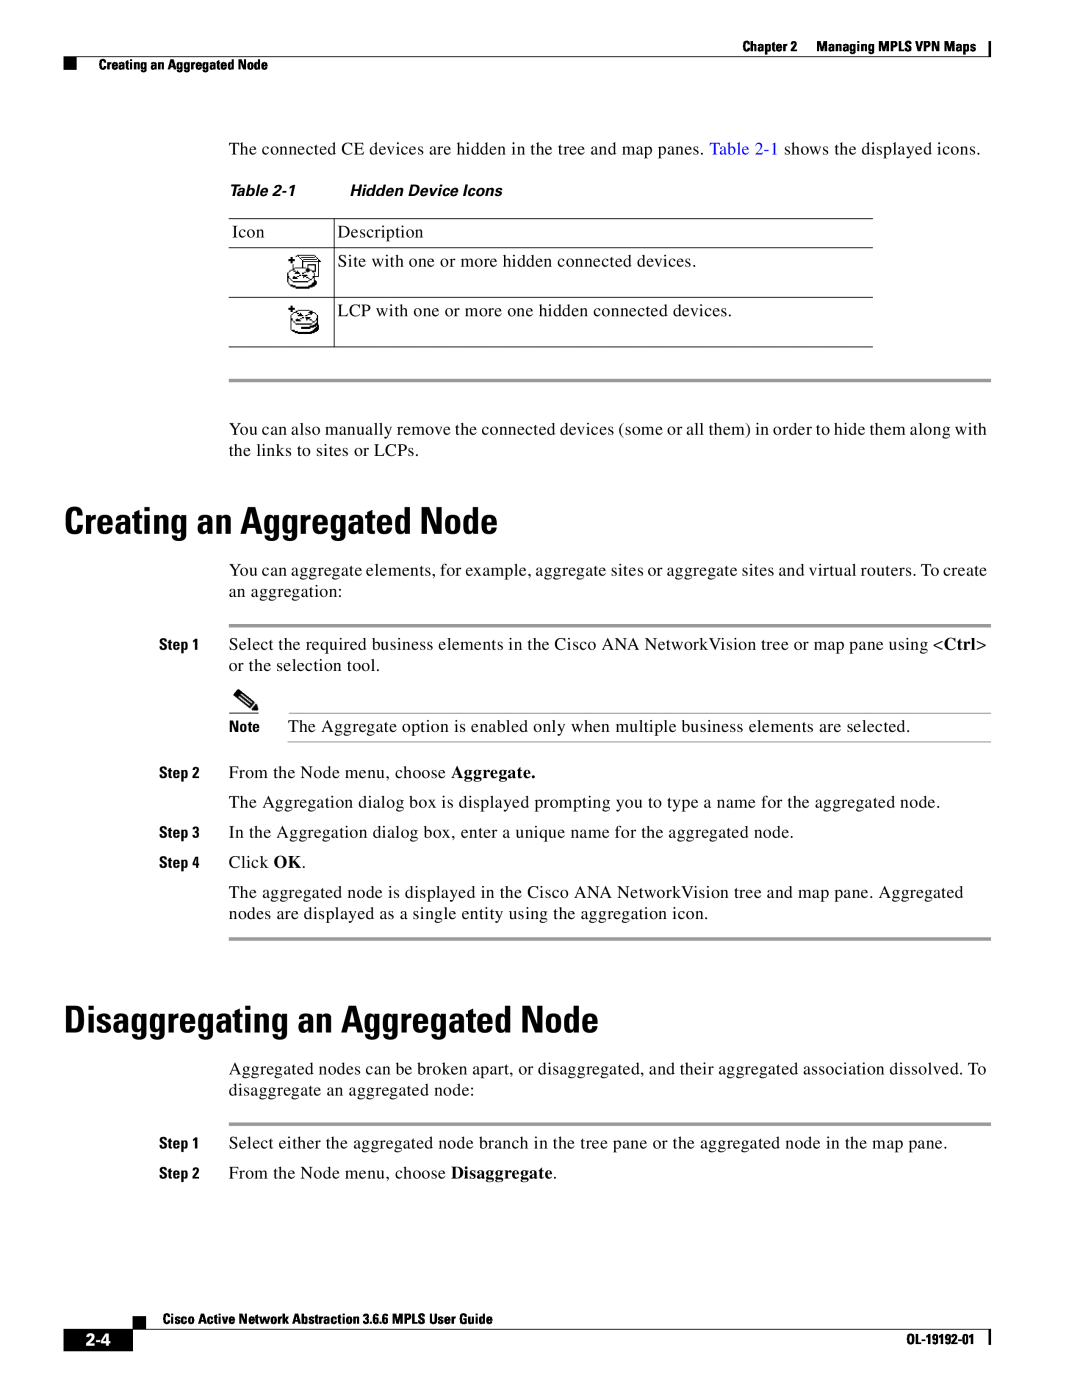 Cisco Systems 3.6.6 manual Creating an Aggregated Node, Disaggregating an Aggregated Node 